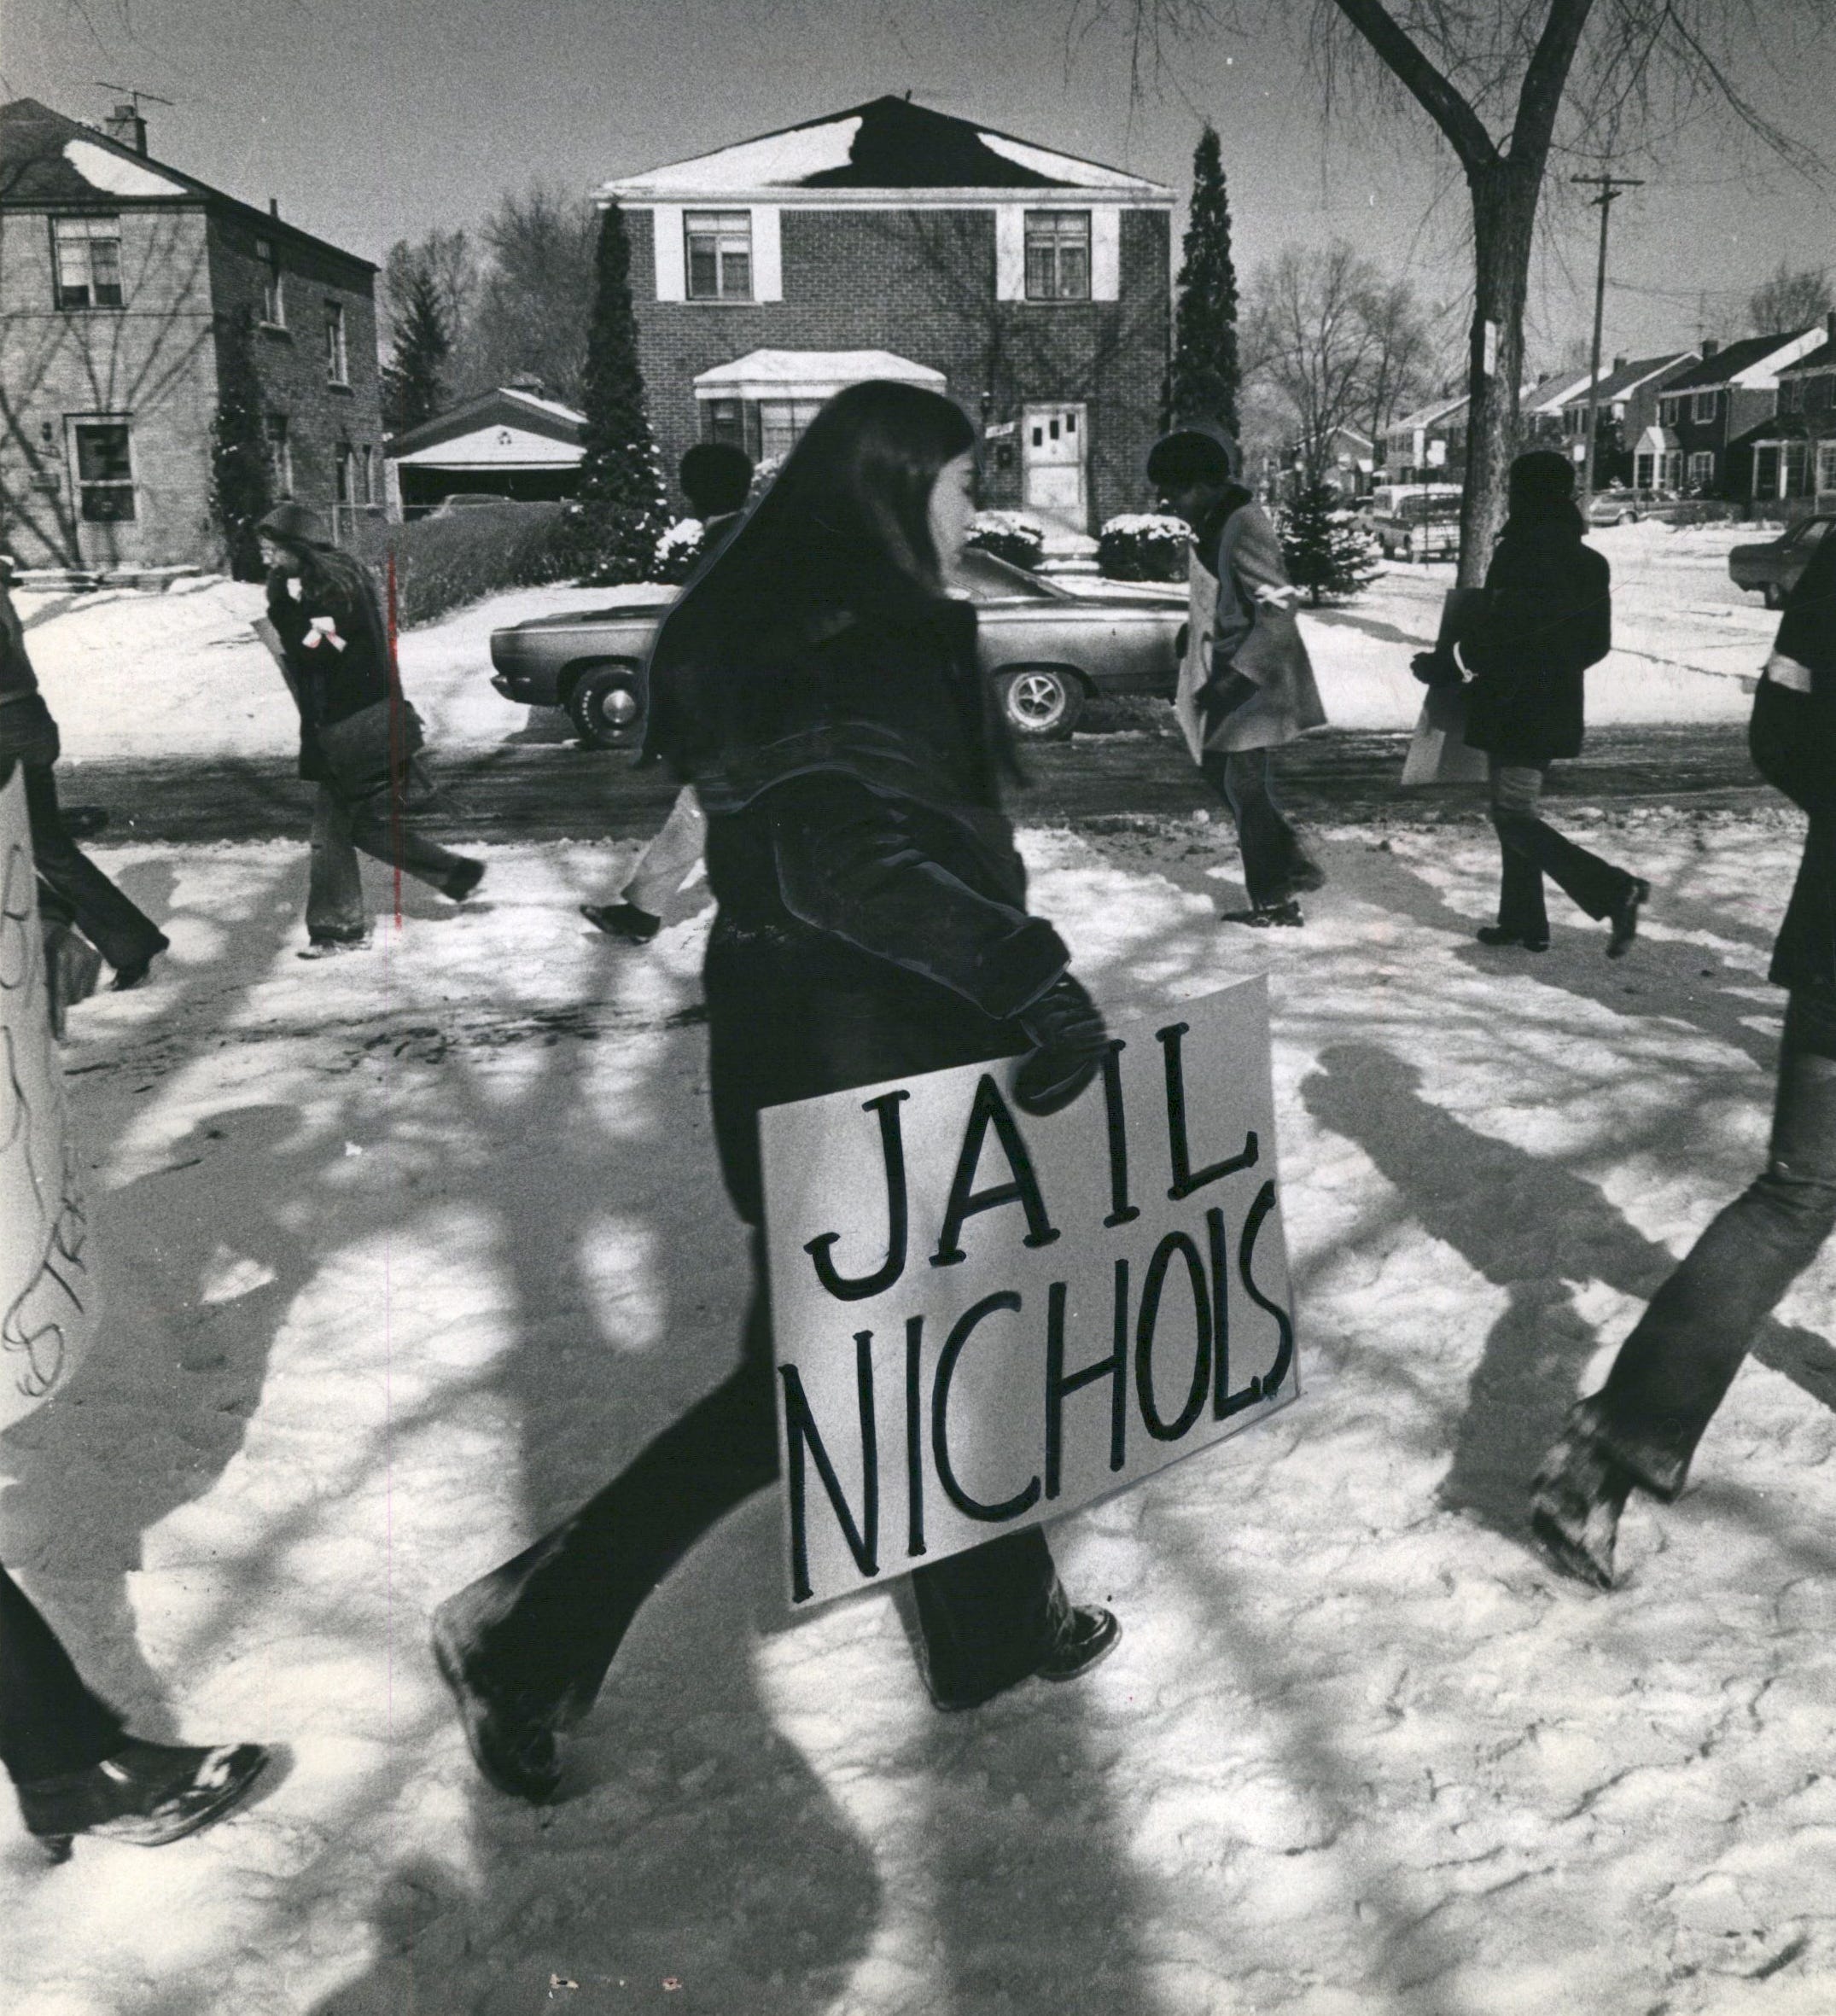 In the early 70s, Police Commissioner John Nichols' house was picketed by protesters demanding the abolition of the department's STRESS program..